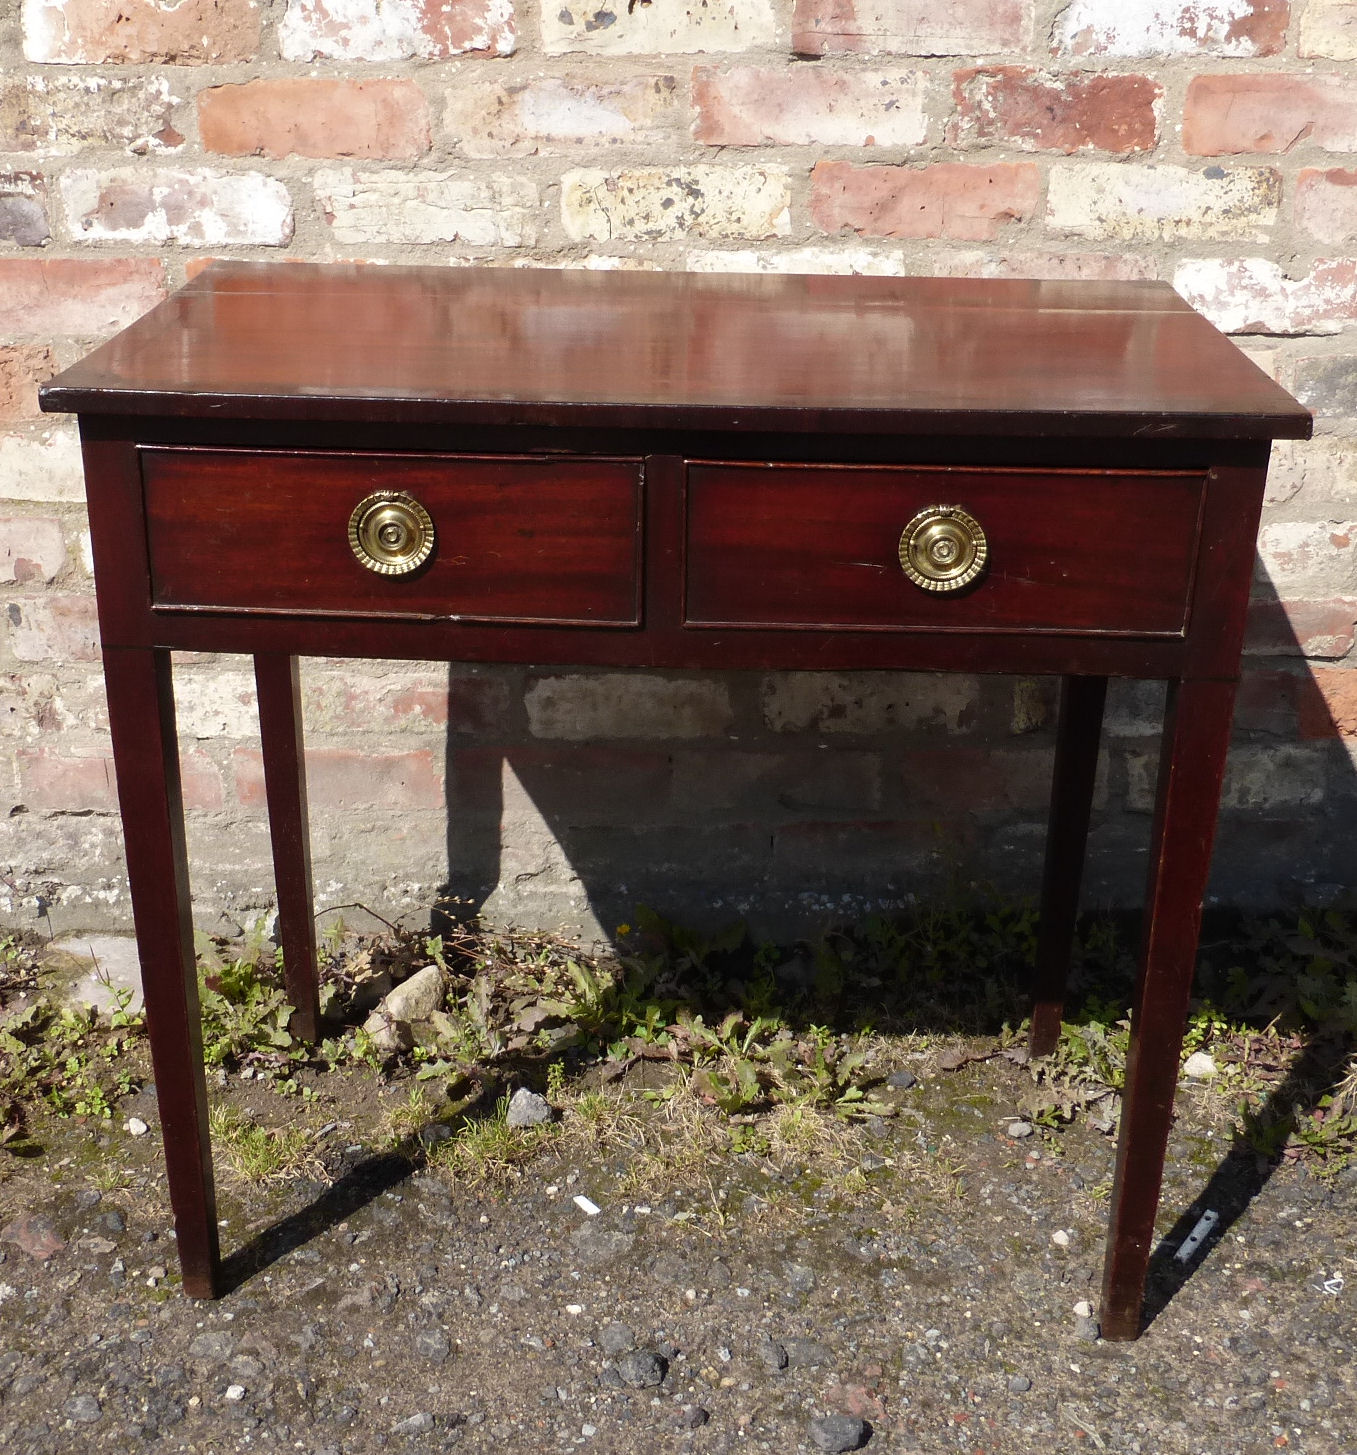 An early 19th century mahogany Side Table with cross banded top, two frieze drawers and square